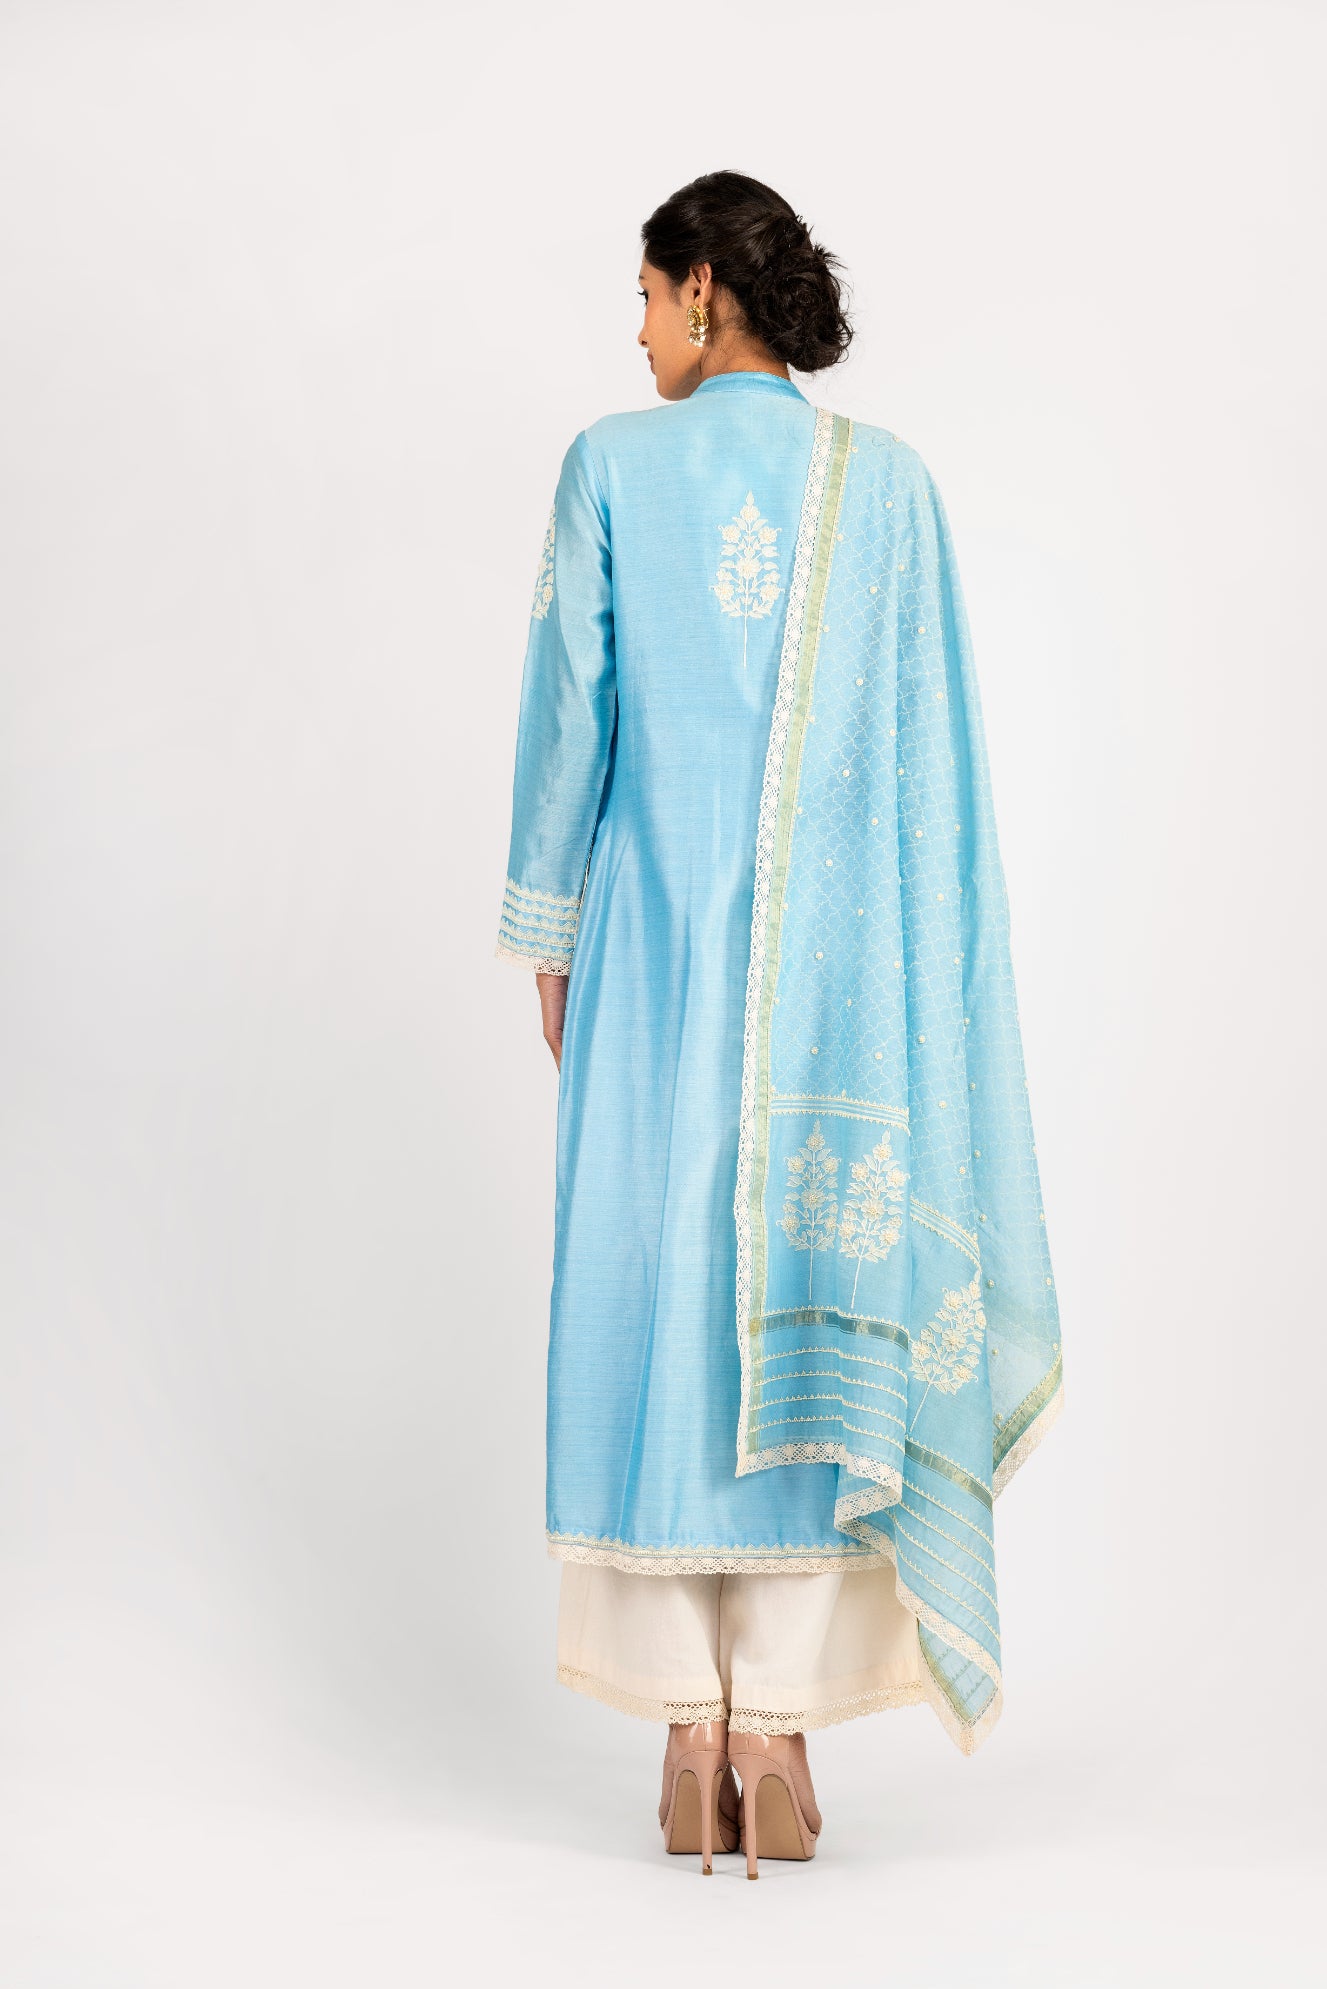 Chanderi Khadi Print with Dori Embroidery & Lace and Pearl Highlighting